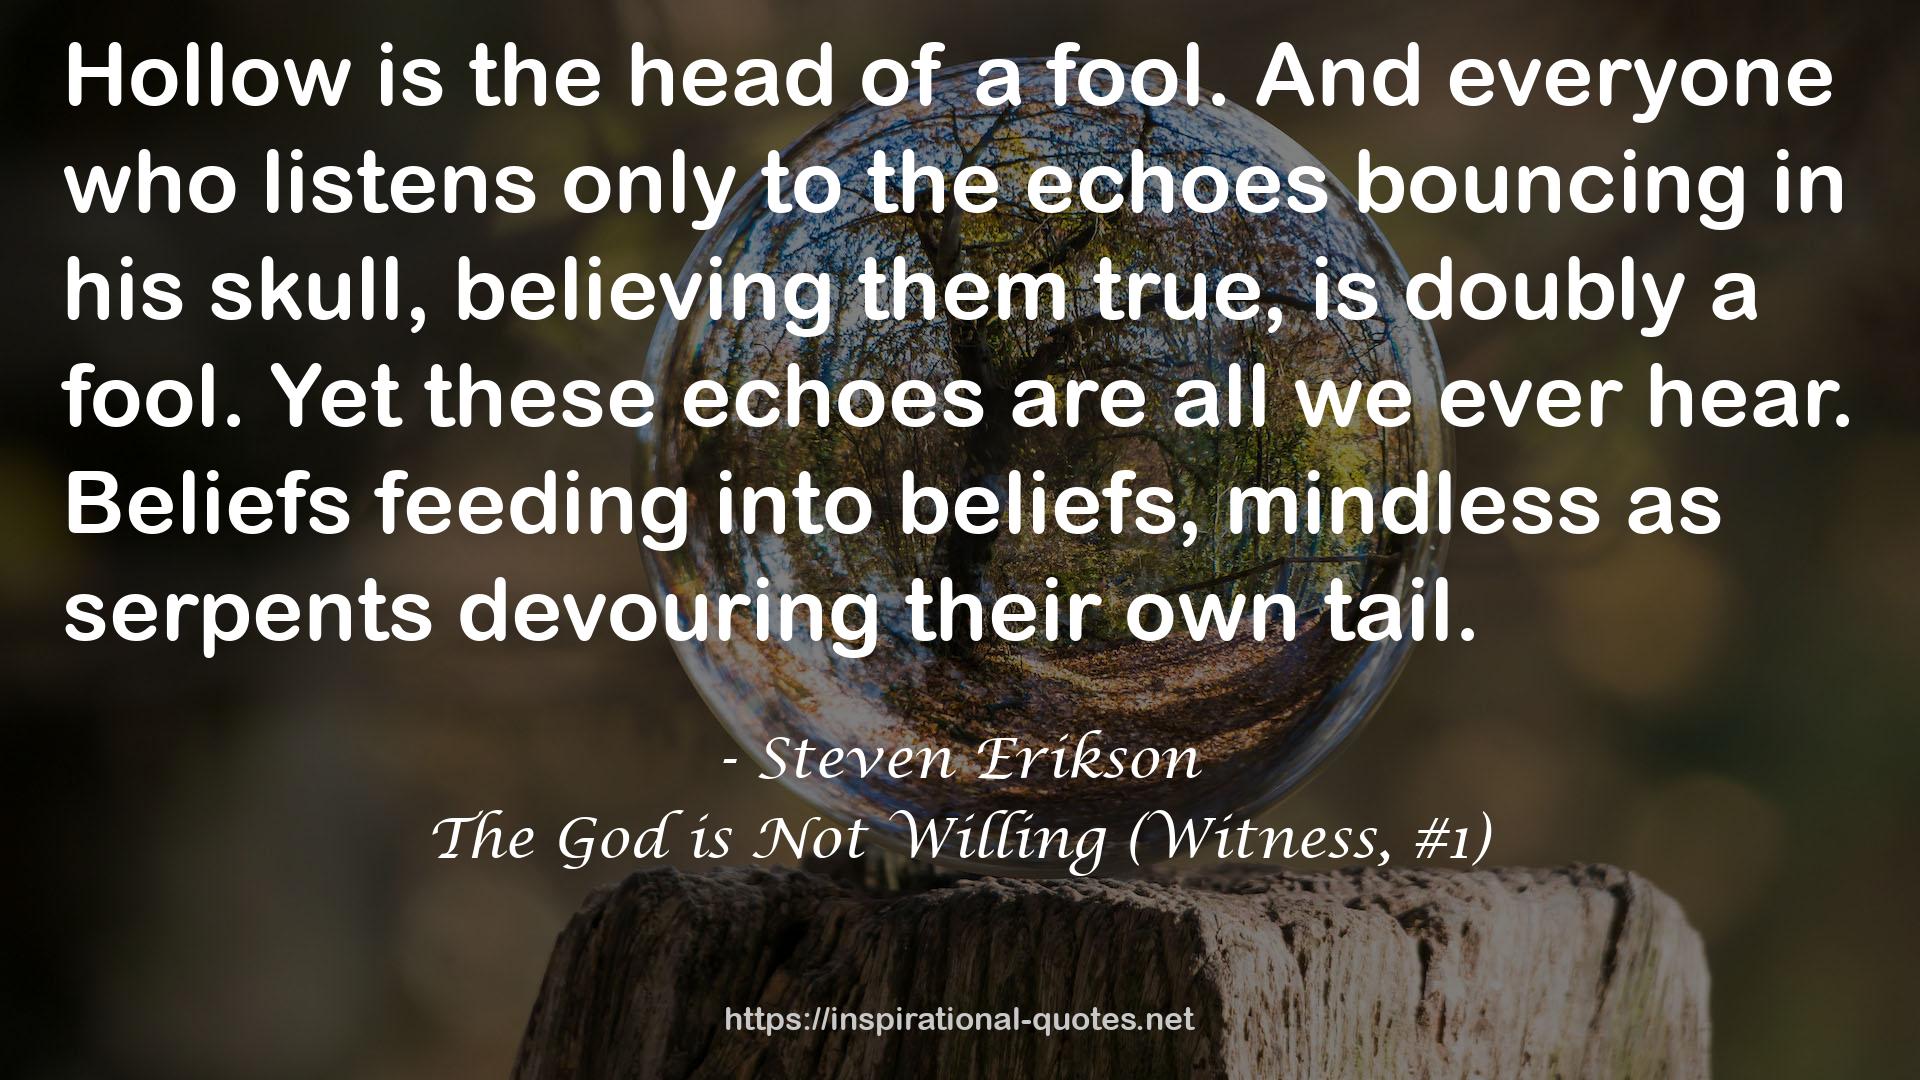 The God is Not Willing (Witness, #1) QUOTES